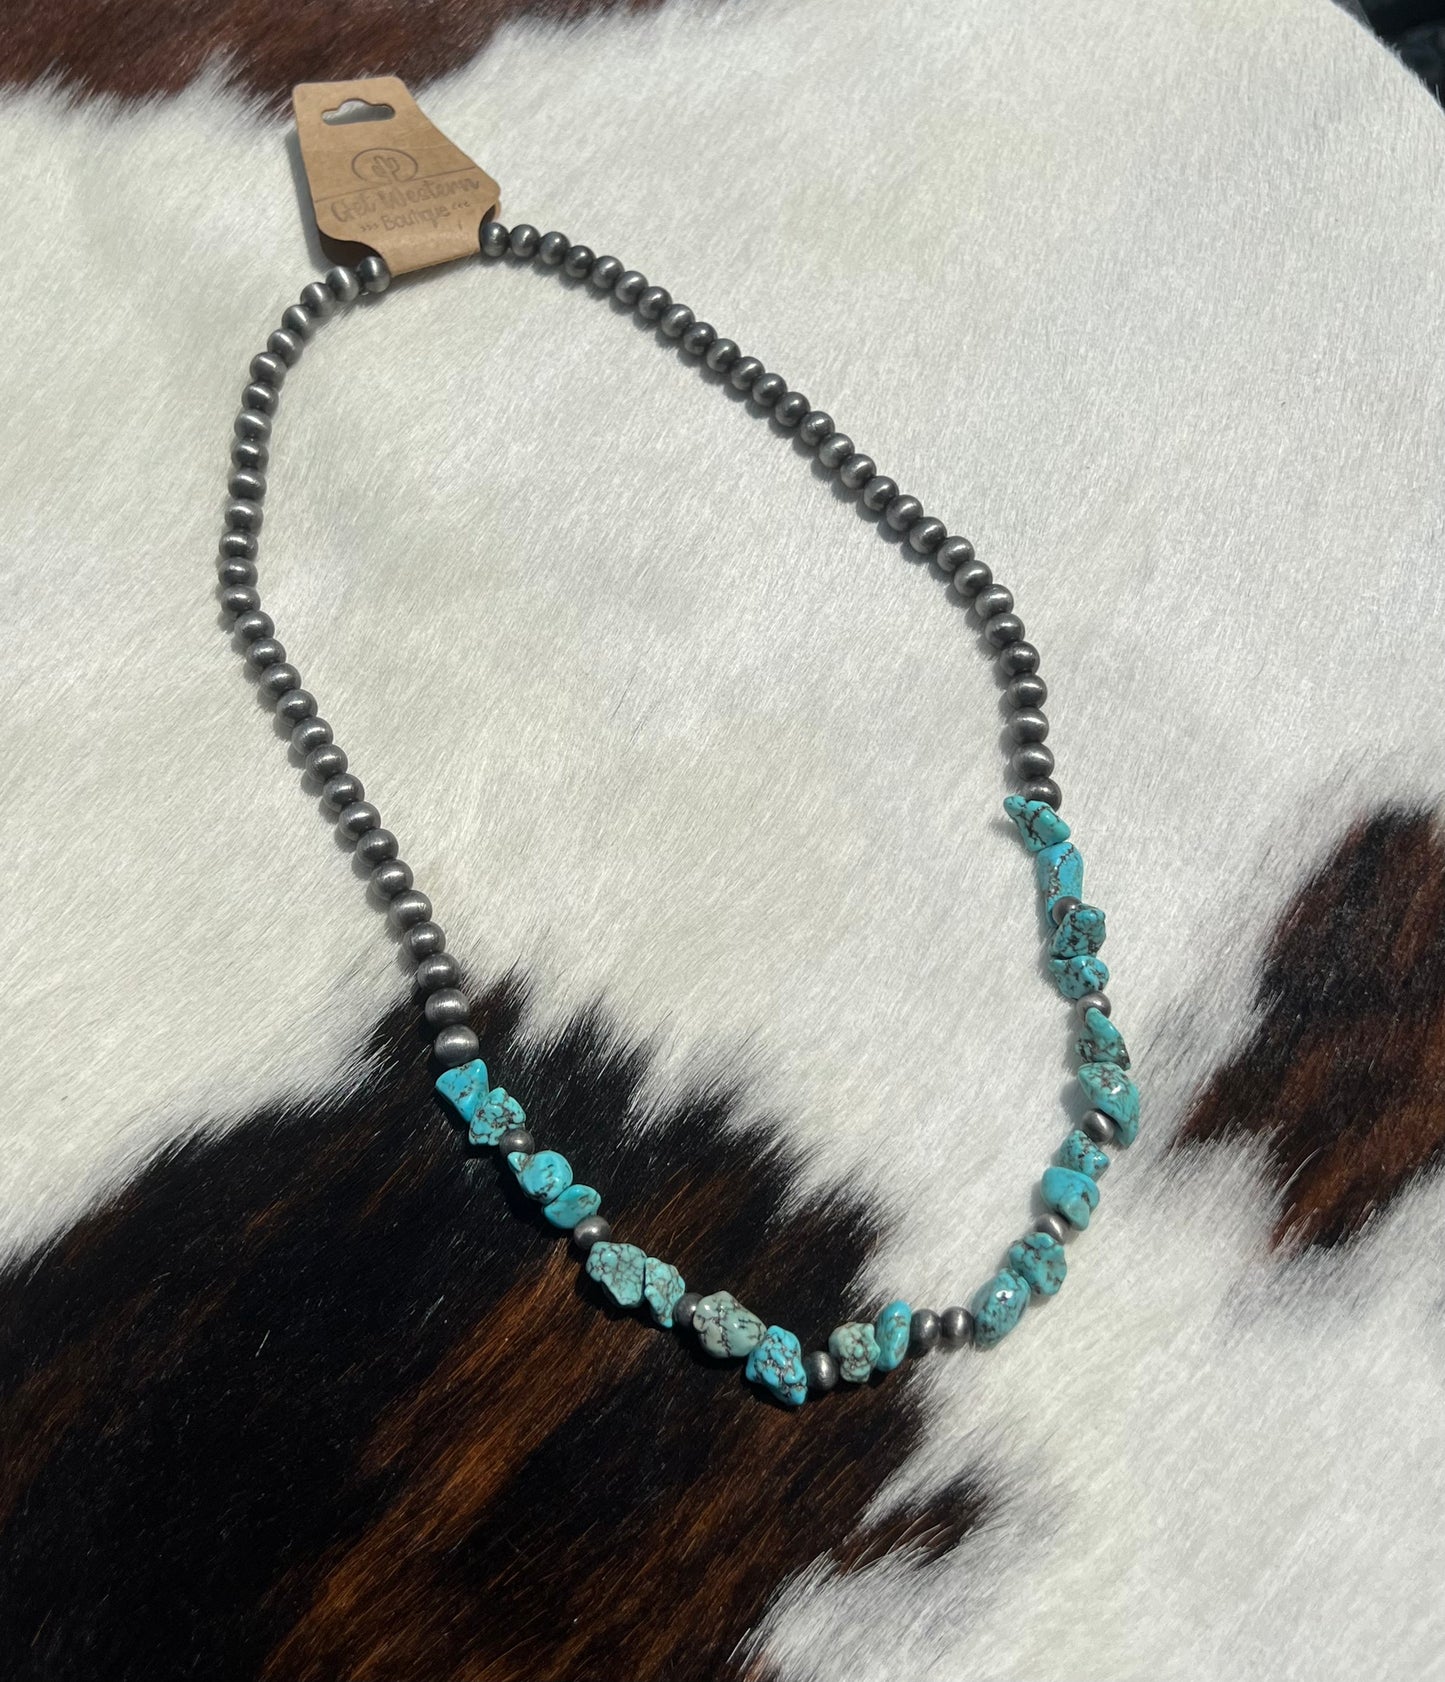 The Trail Boss Necklace